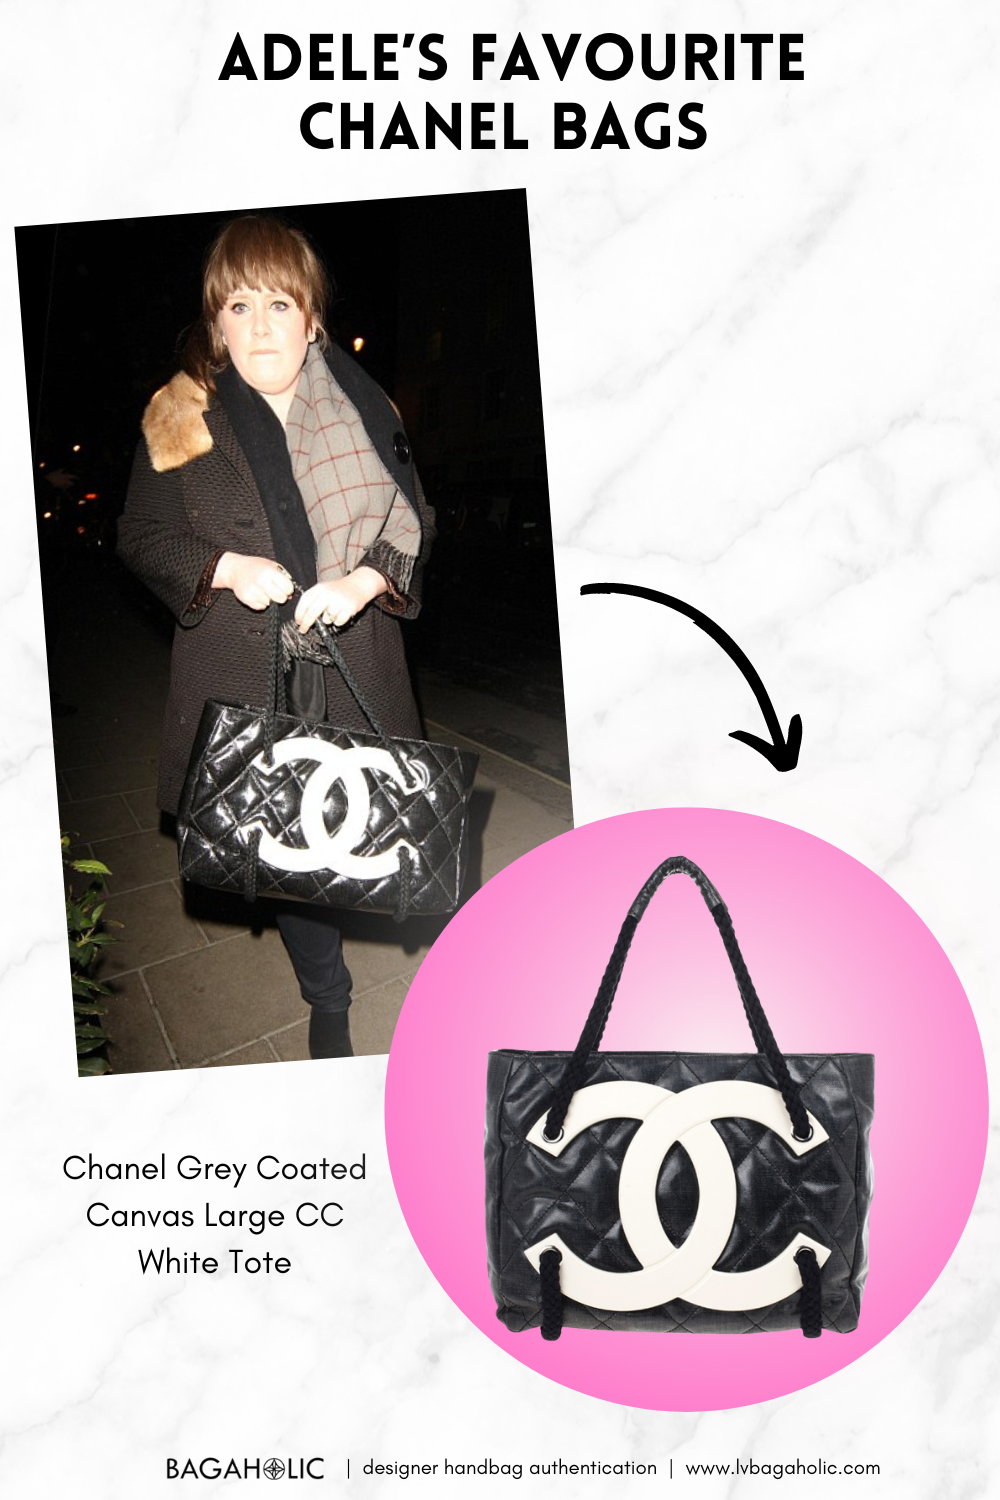 100 Celebs and Their Favorite Chanel Bags beyonce chanel boy bag celebs Part1  Adele Classic Flap bag